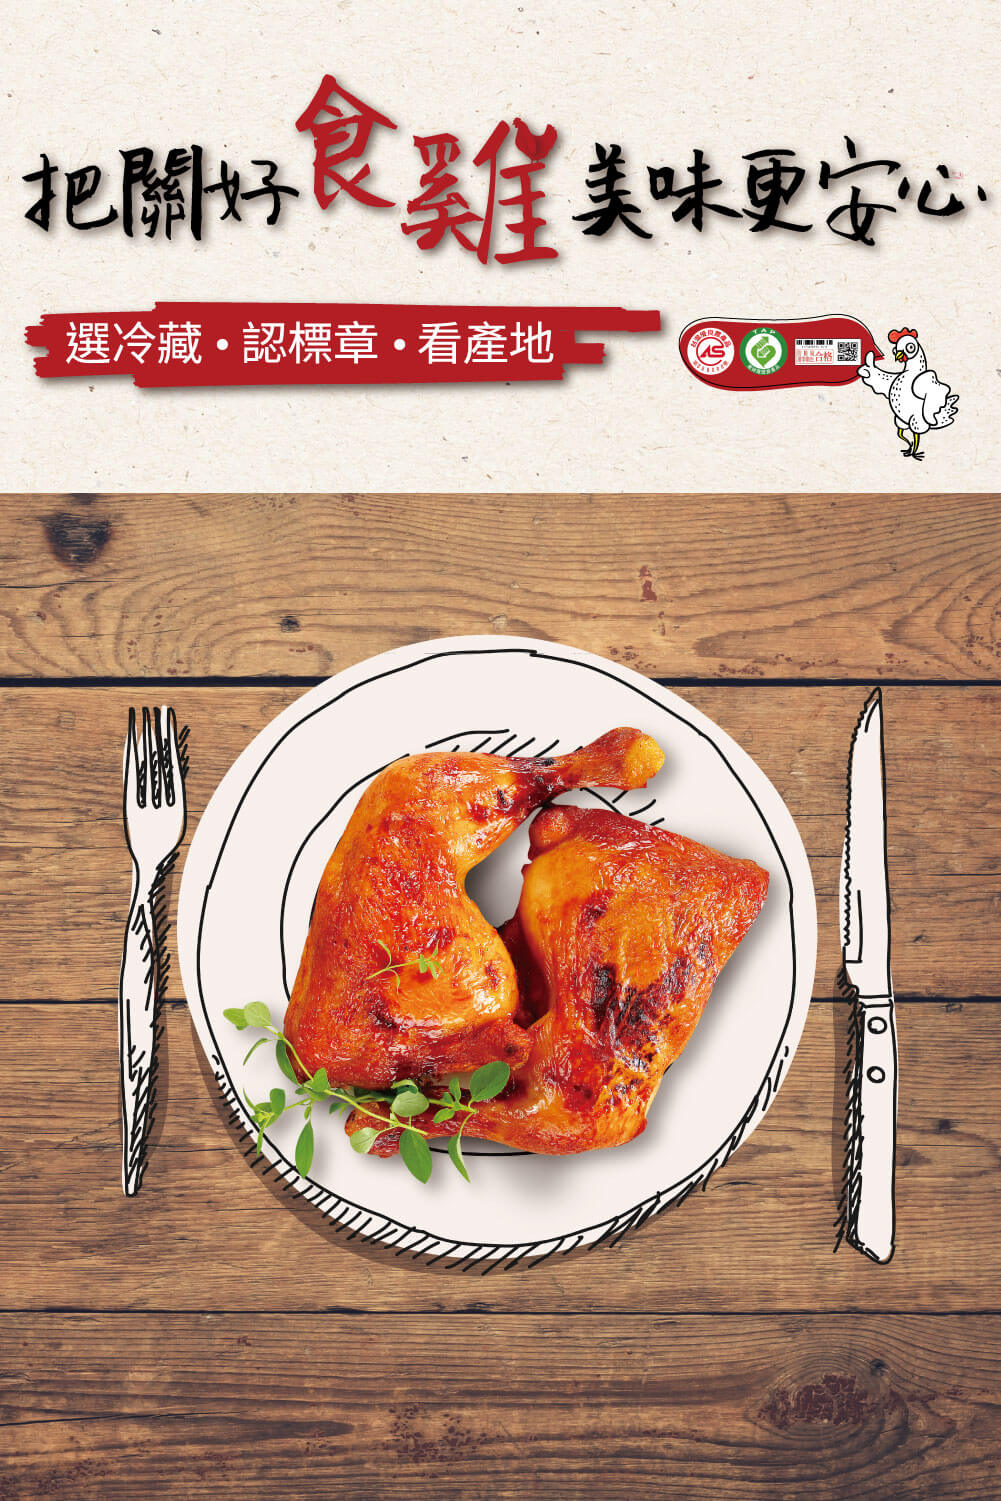 Promotion of Taiwanese chickens